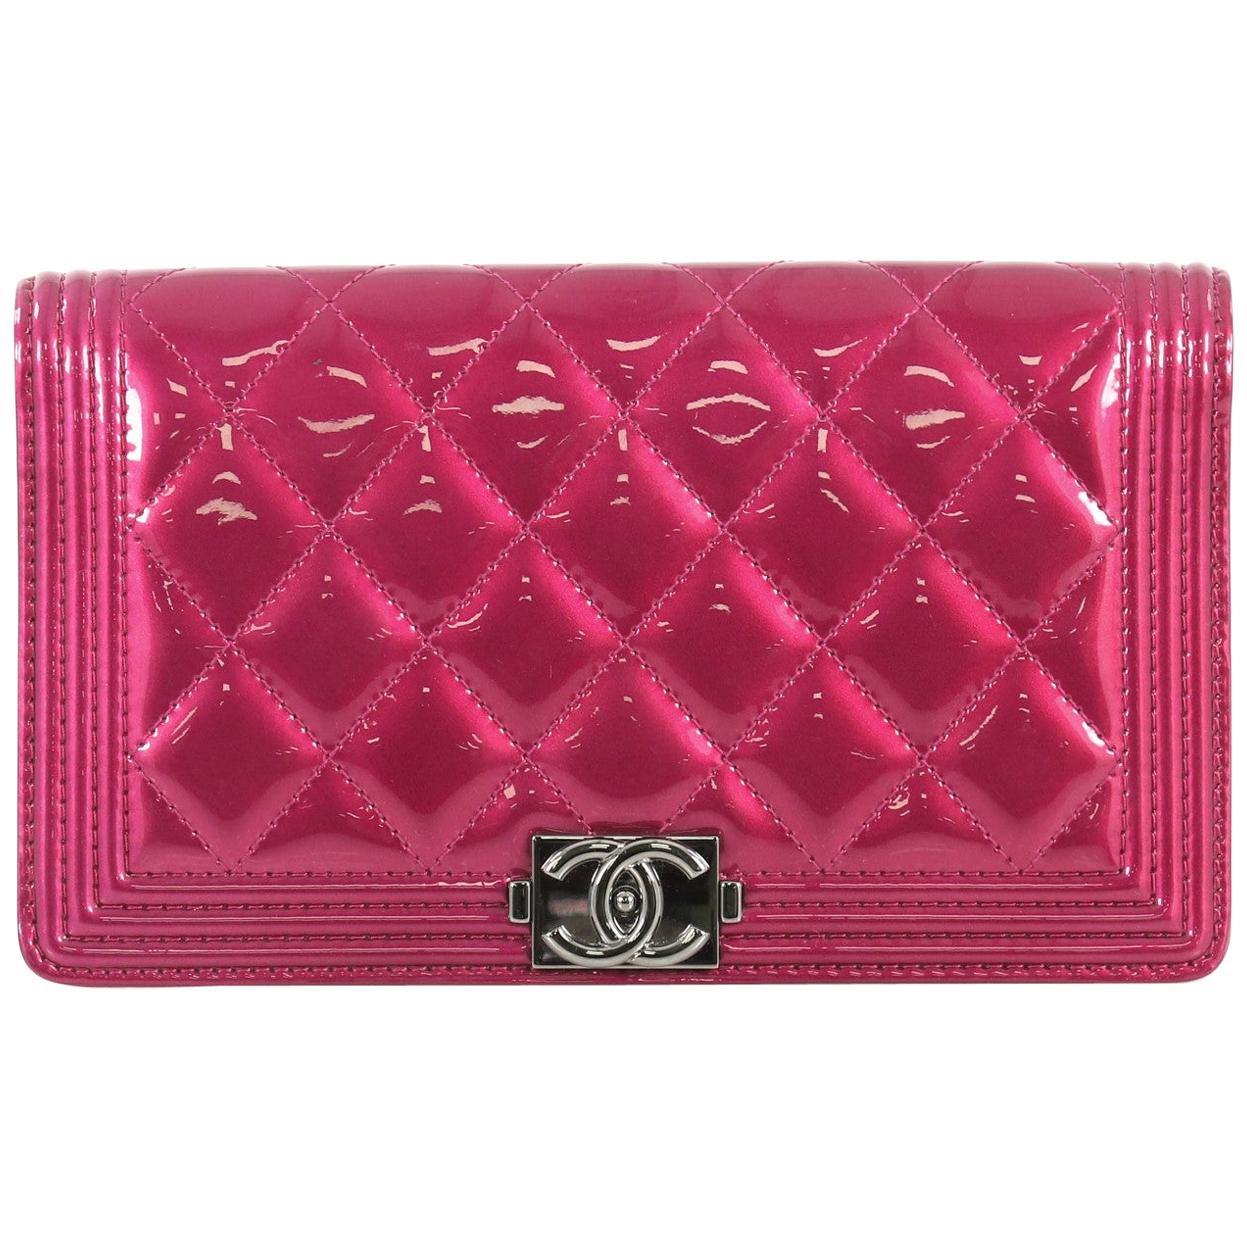 Chanel Boy Yen Wallet Quilted Patent